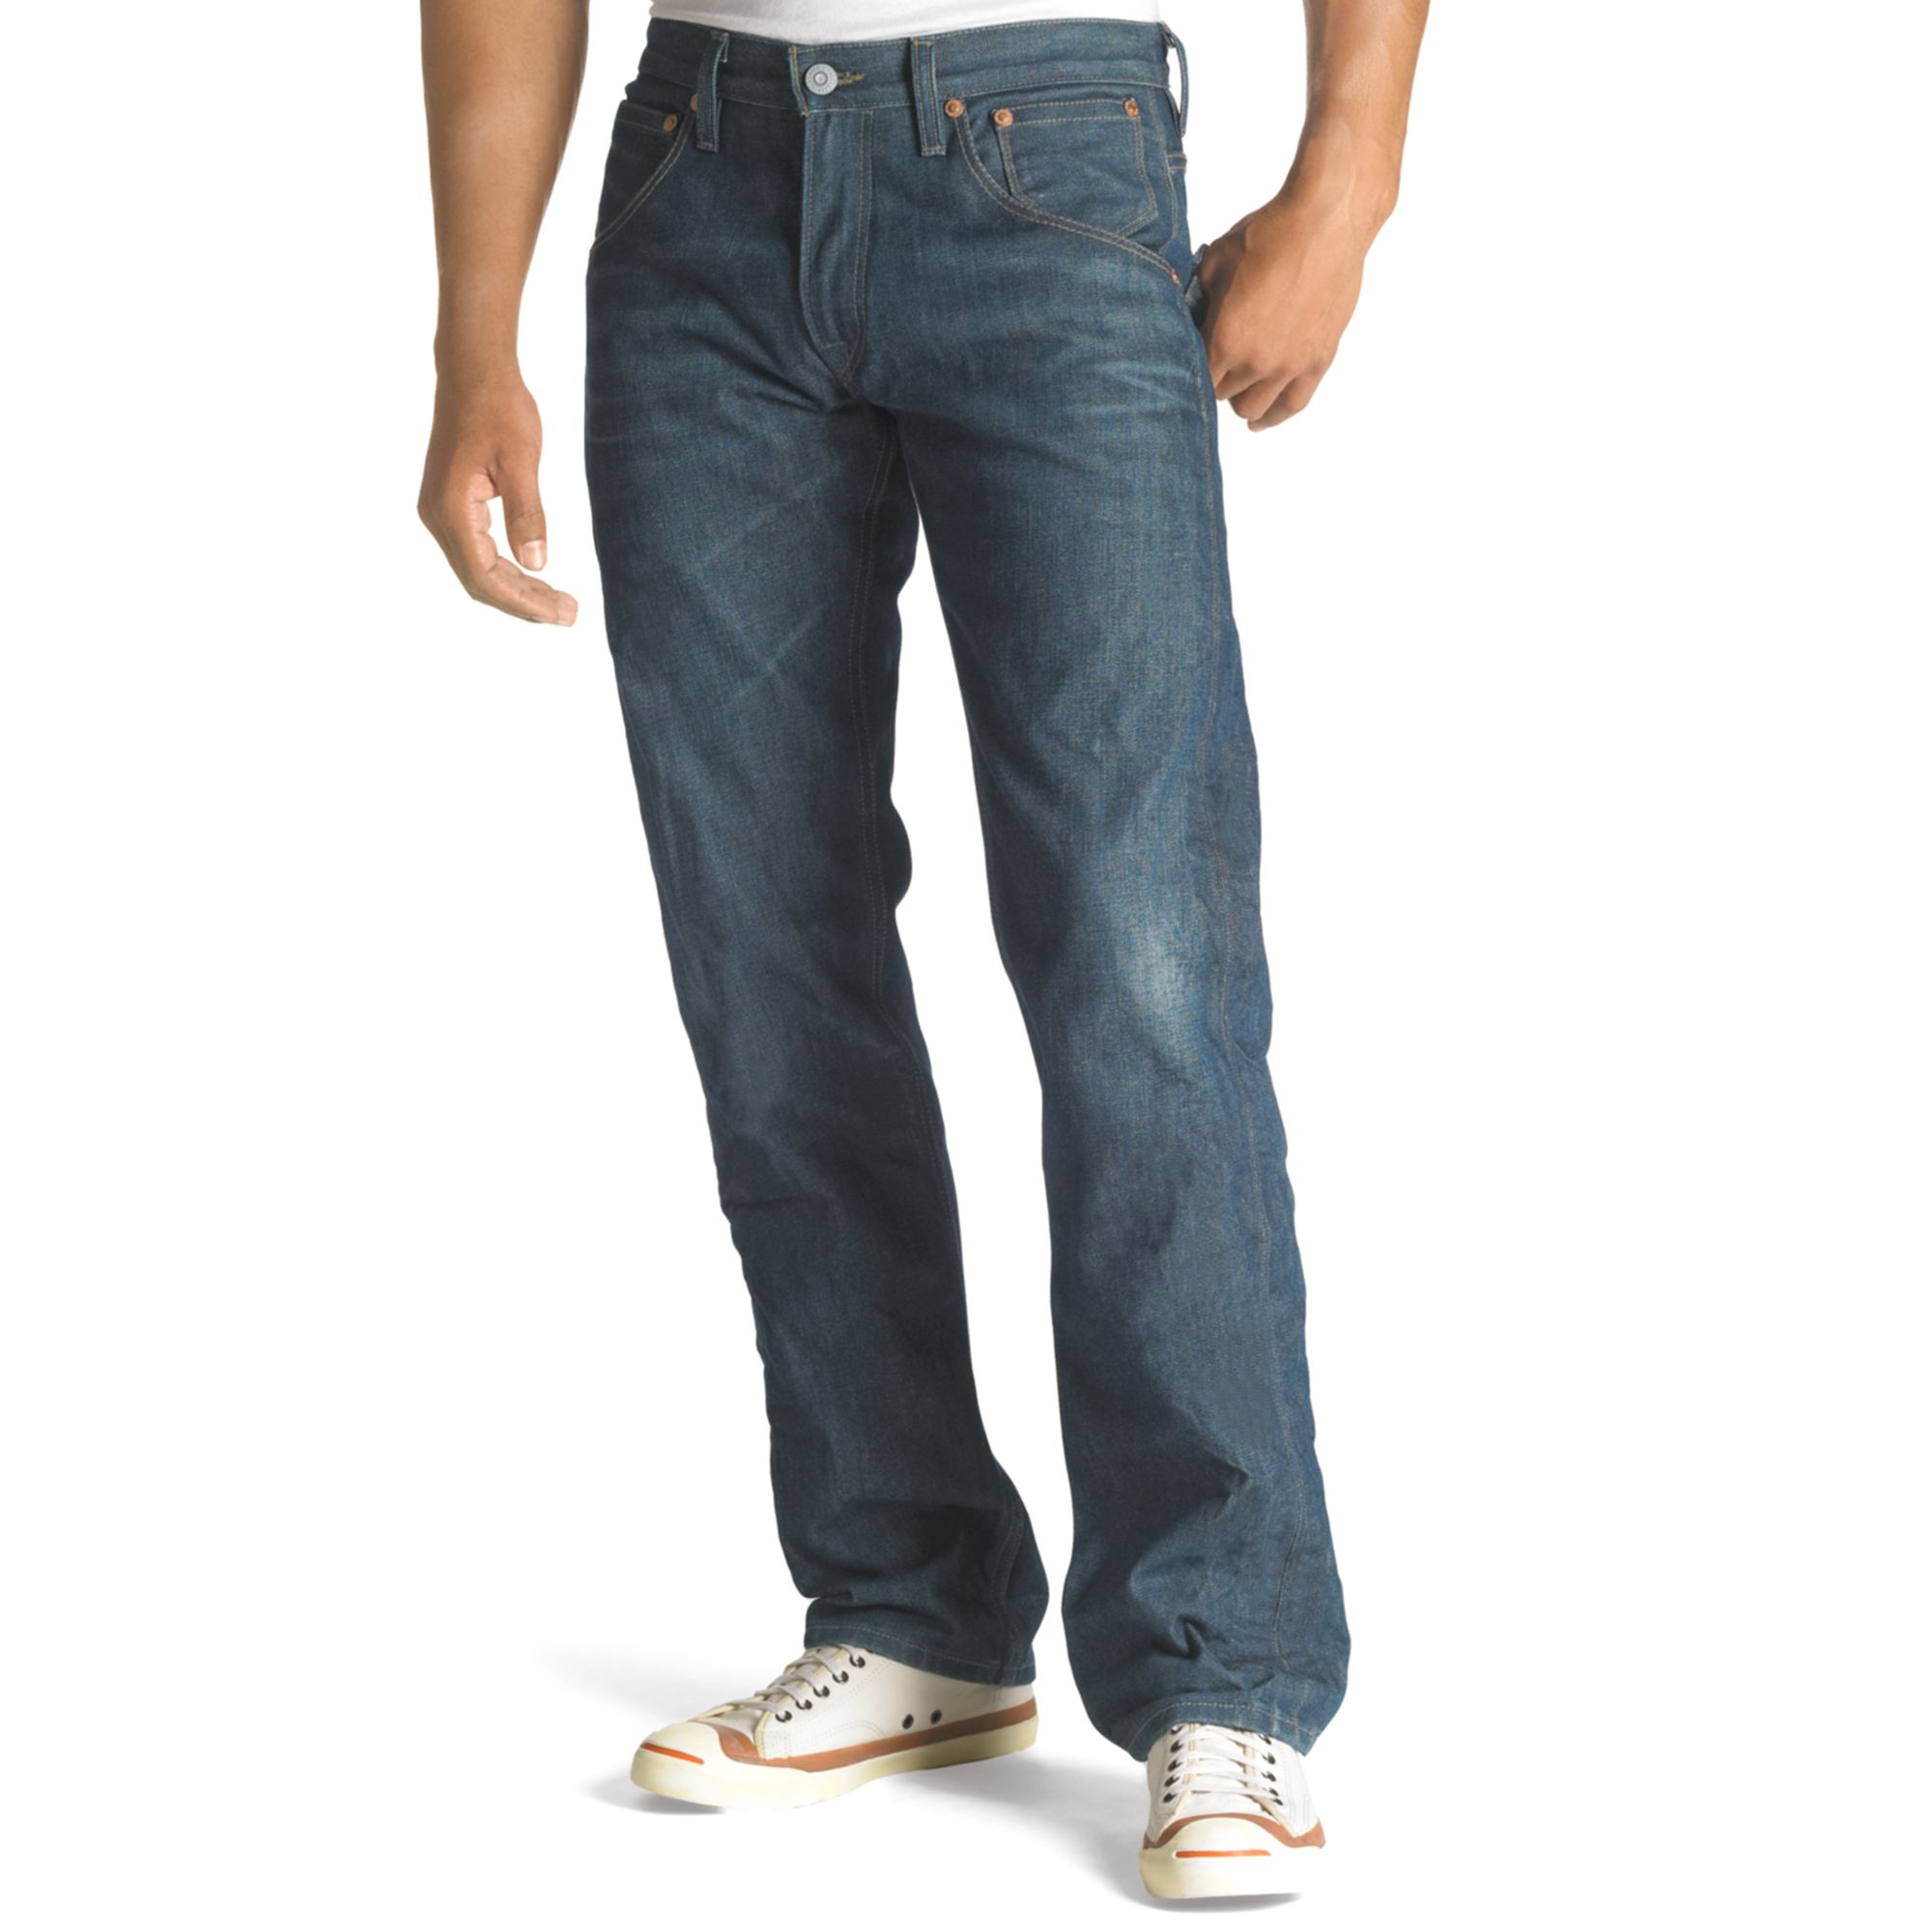 Levi's 514 Slim Straight Leg Jeans with Pacific Flap Back Pockets in ...